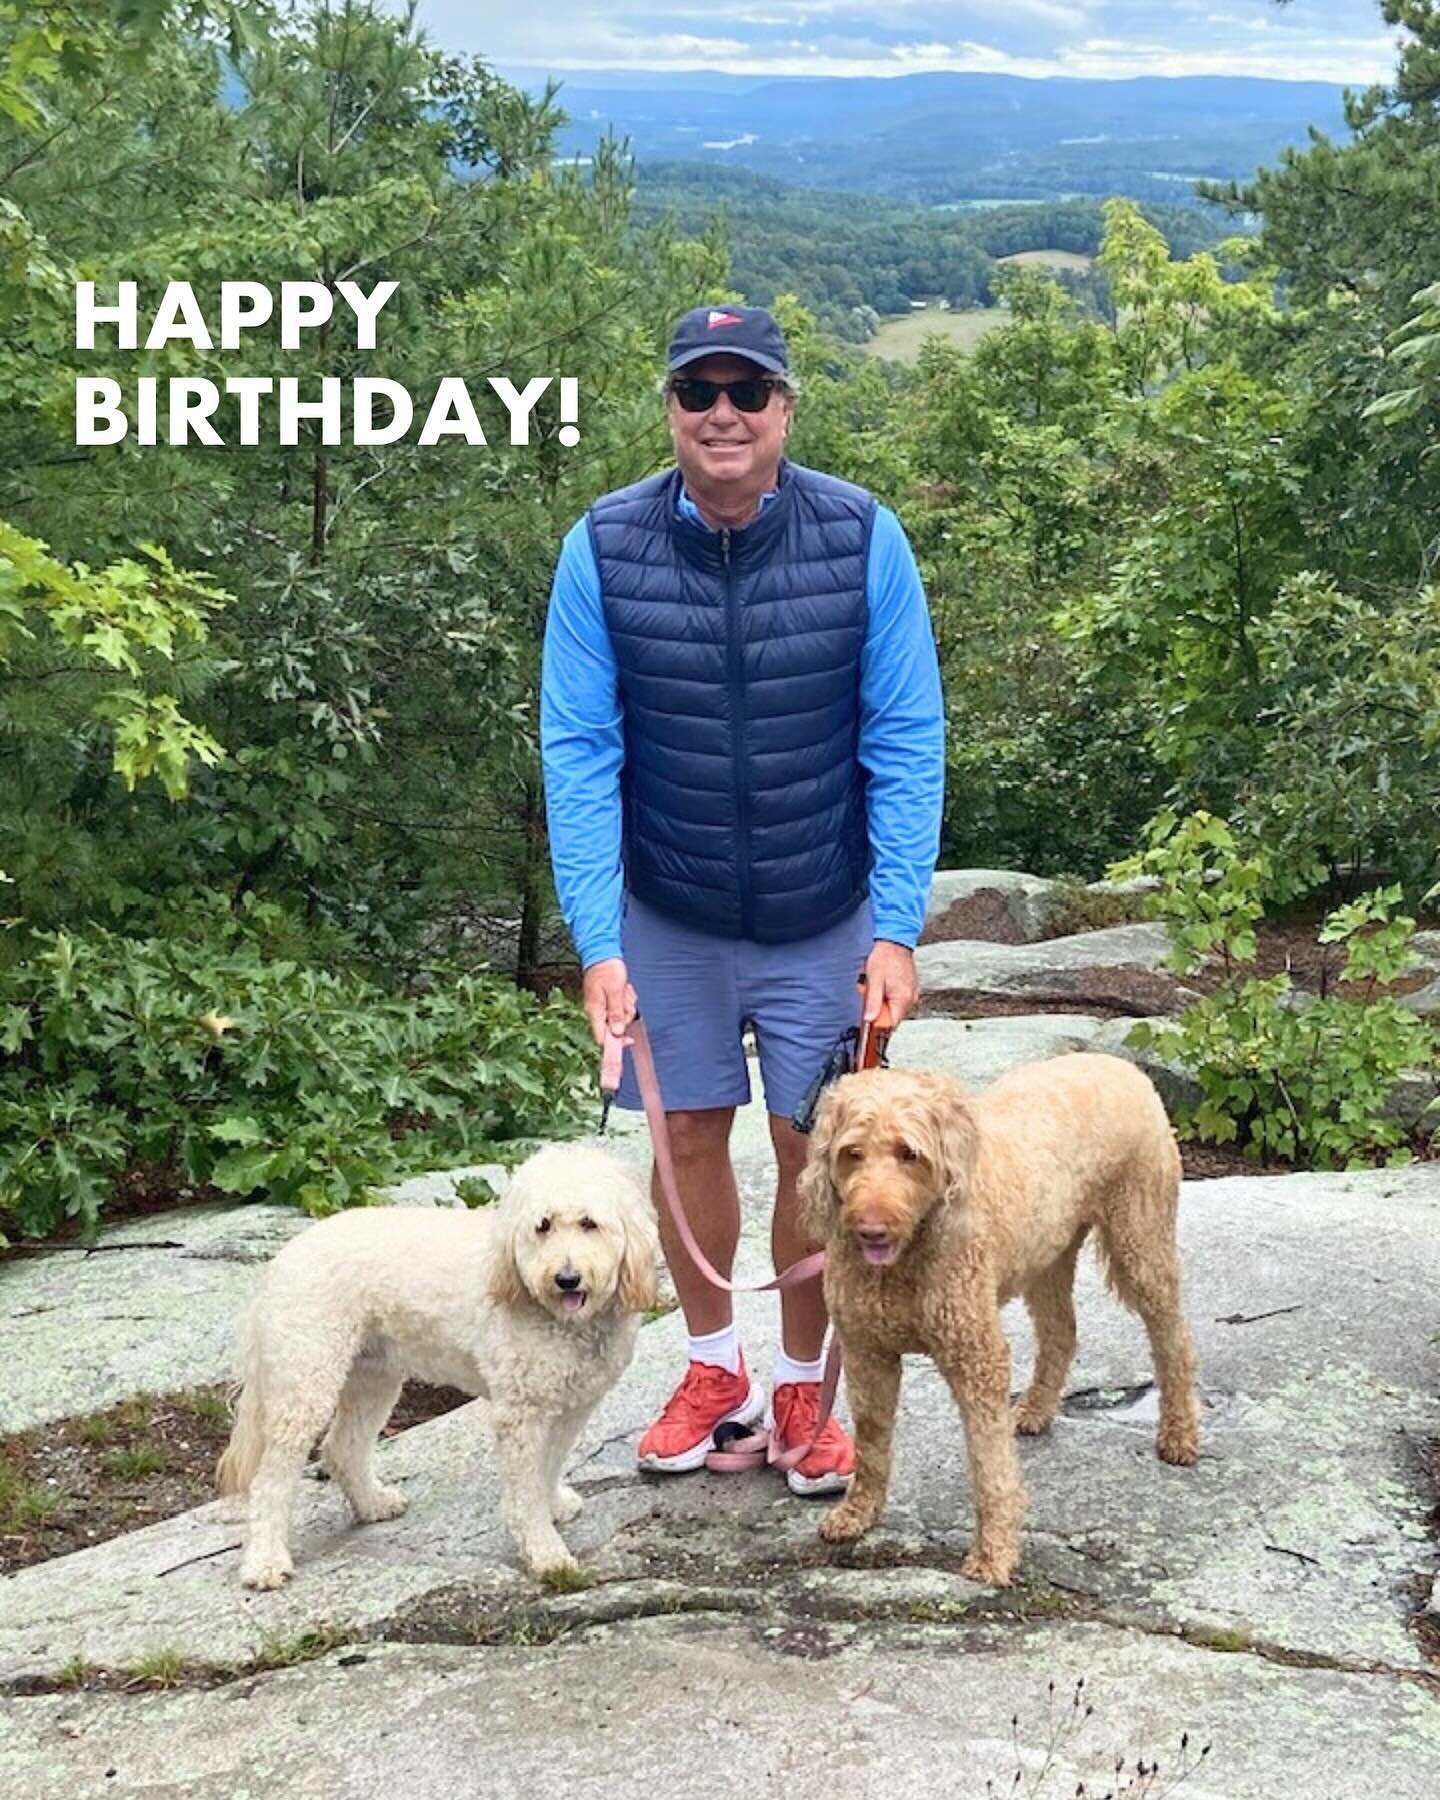 HAPPY BIRTHDAY to Oakley&rsquo;s Dad&rsquo;s, Robert, who fights tirelessly in his son&rsquo;s name to make the world a safer place for the food allergy community! 🥳💕 
 
Robert started a birthday fundraiser for RSFO because all he wants on his spec